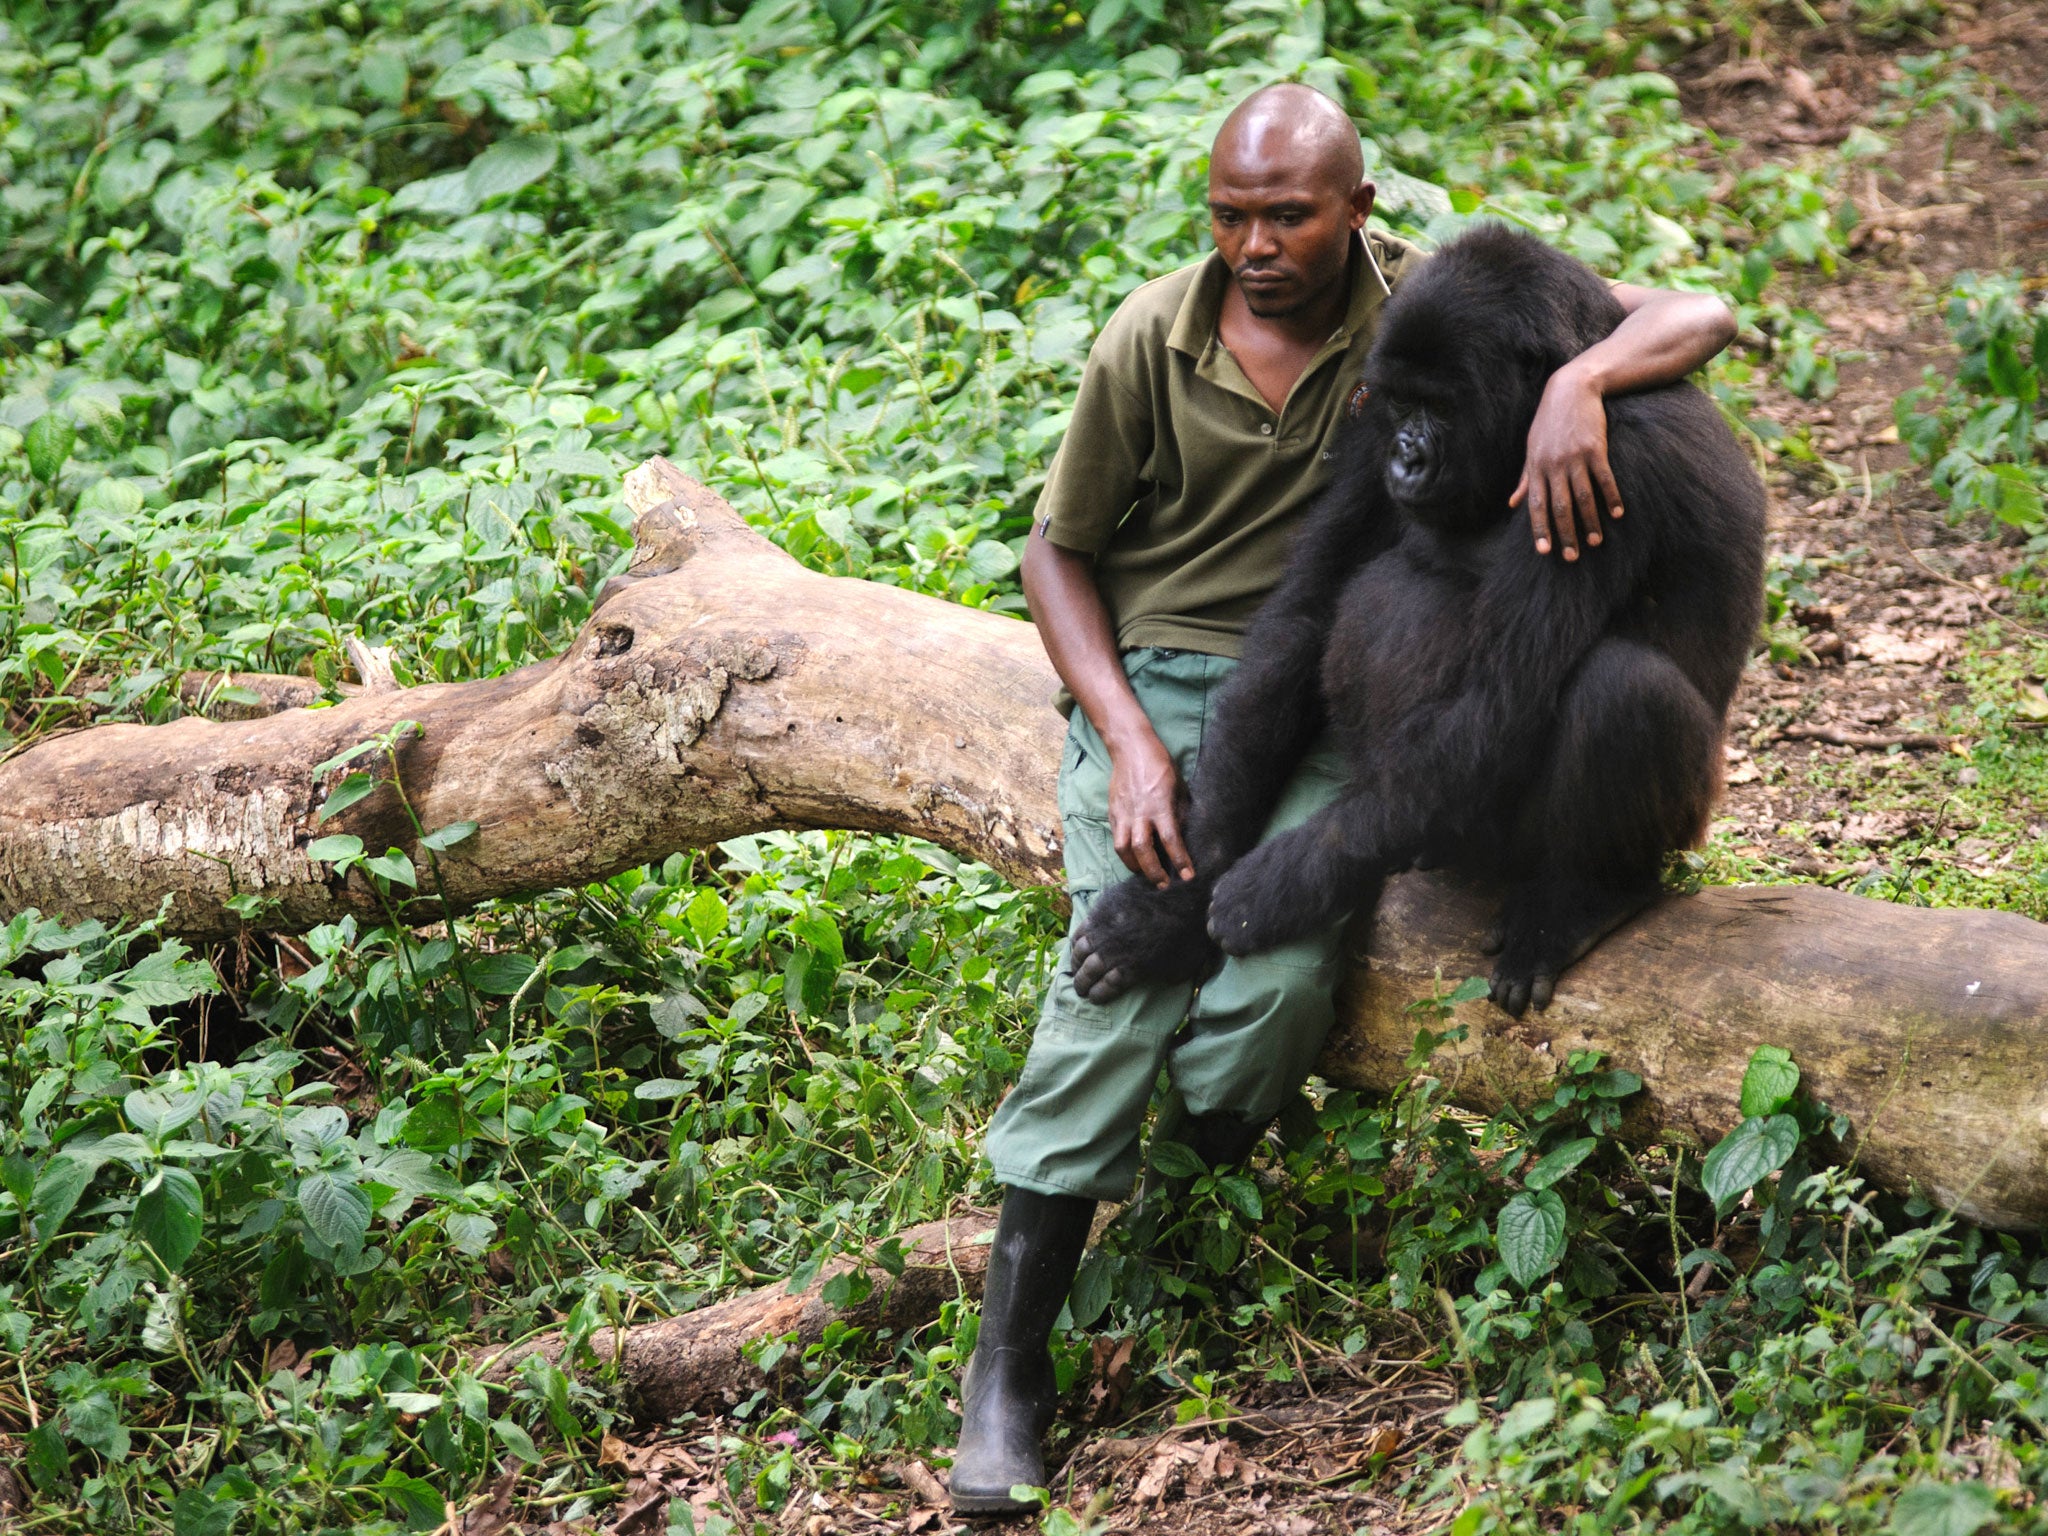 Wild? A National Park warden sits with an orphaned mountain gorilla